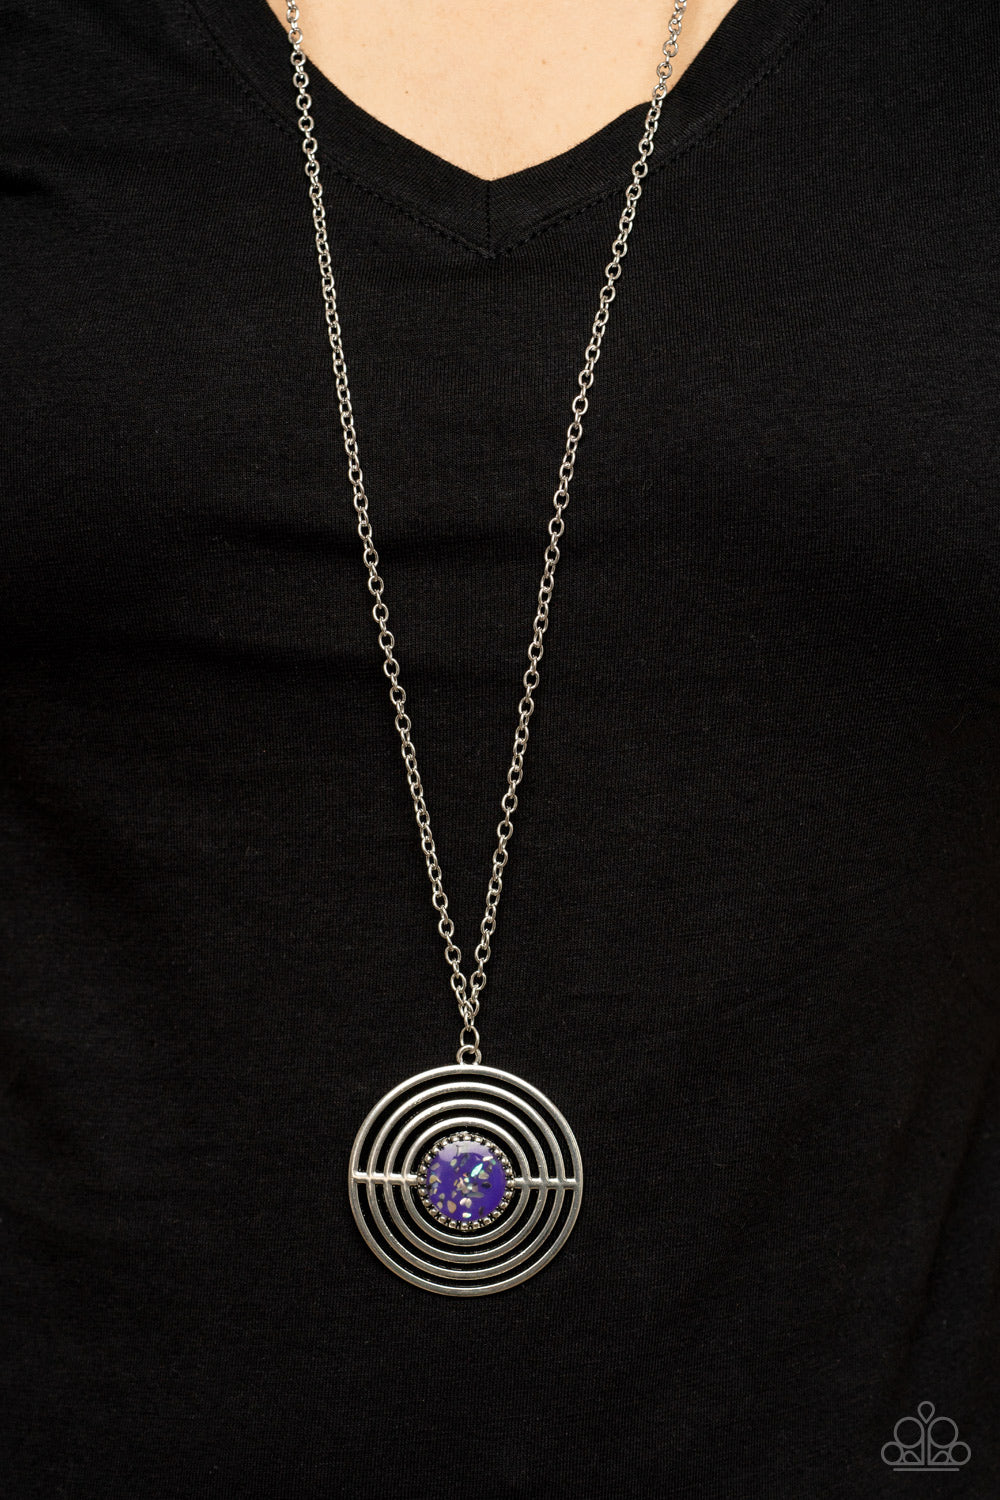 Targeted Tranquility - Purple necklace